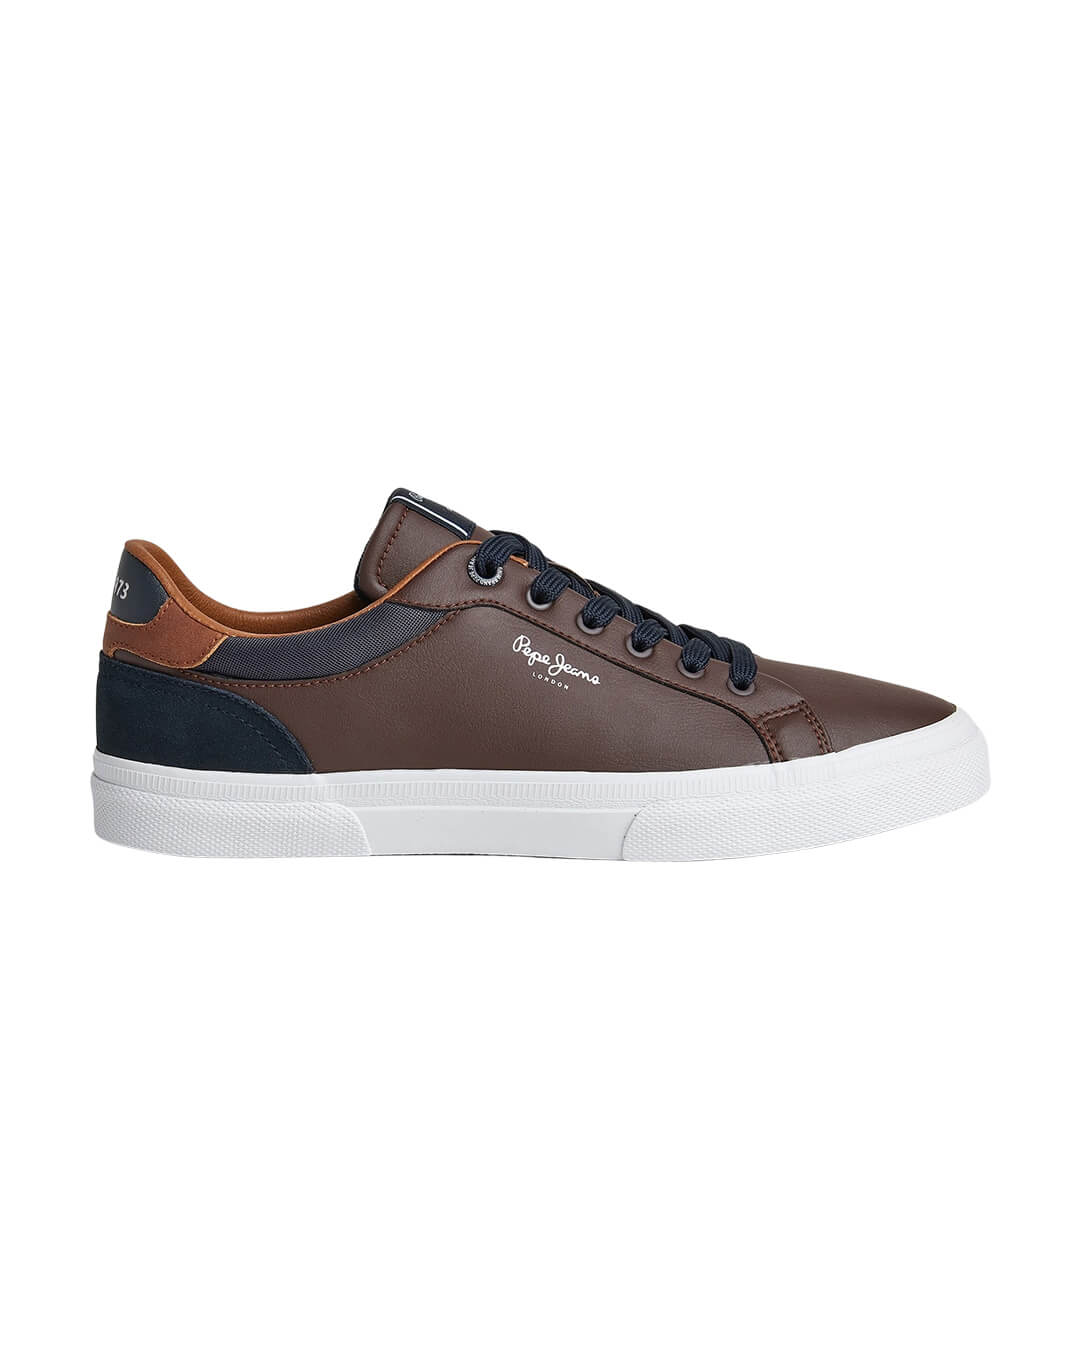 Pepe Jeans Shoes Pepe Jeans Kenton Brown Court Sneakers